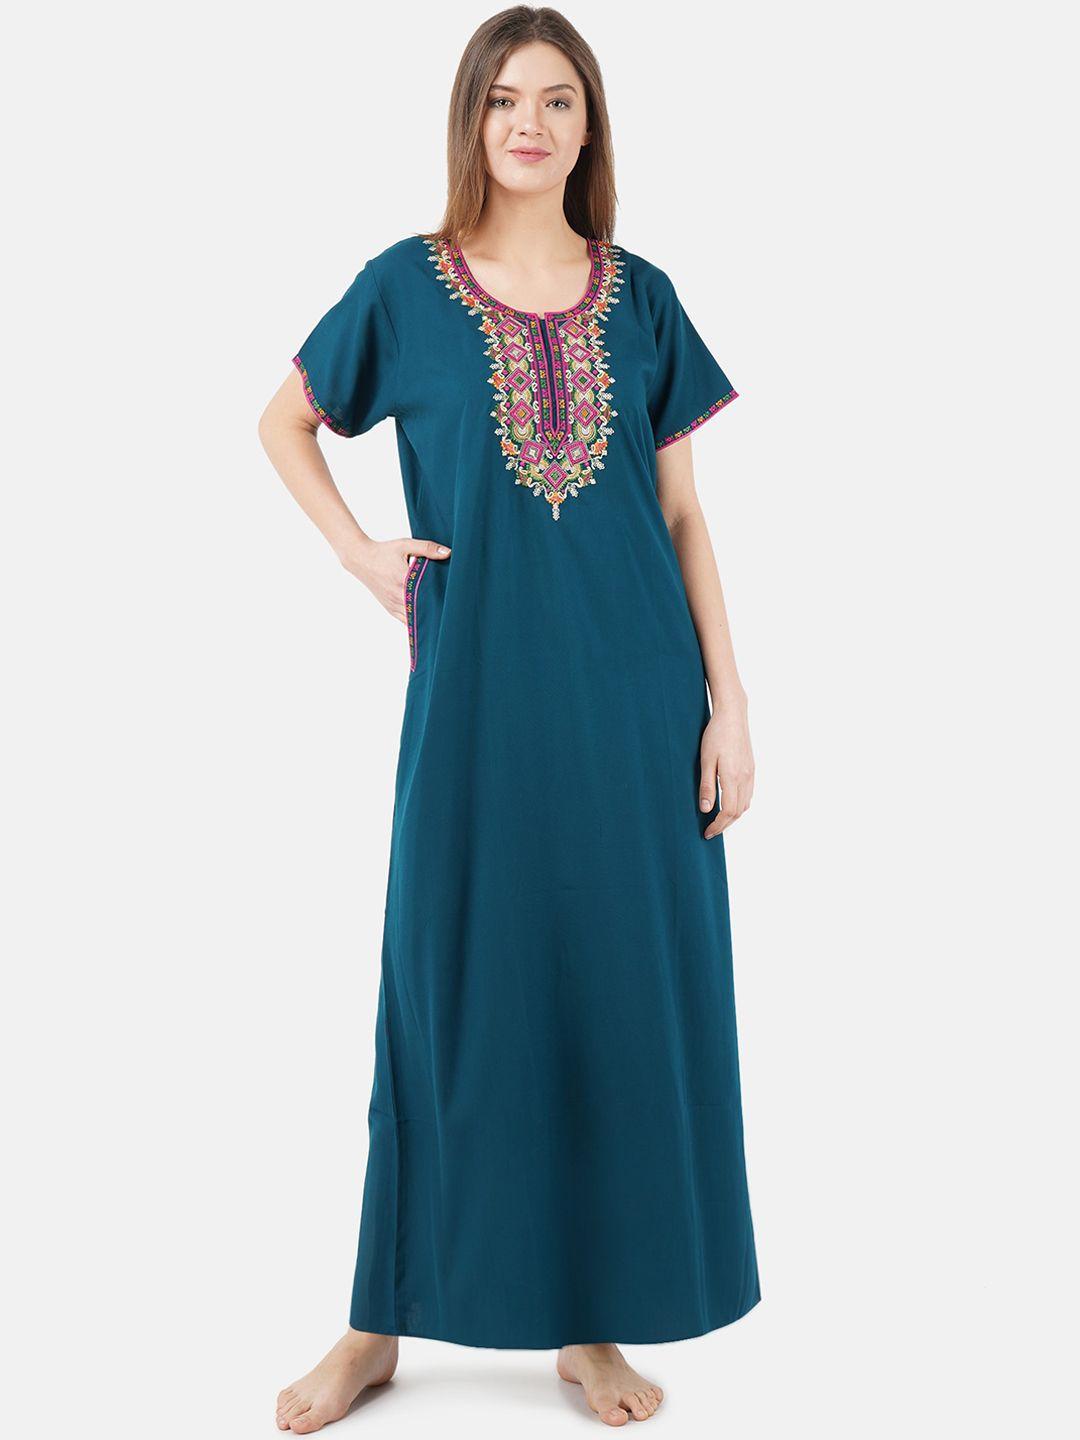 KOI SLEEPWEAR Woman Teal Blue Embroidered Maxi Cotton Nightdress With Pockets